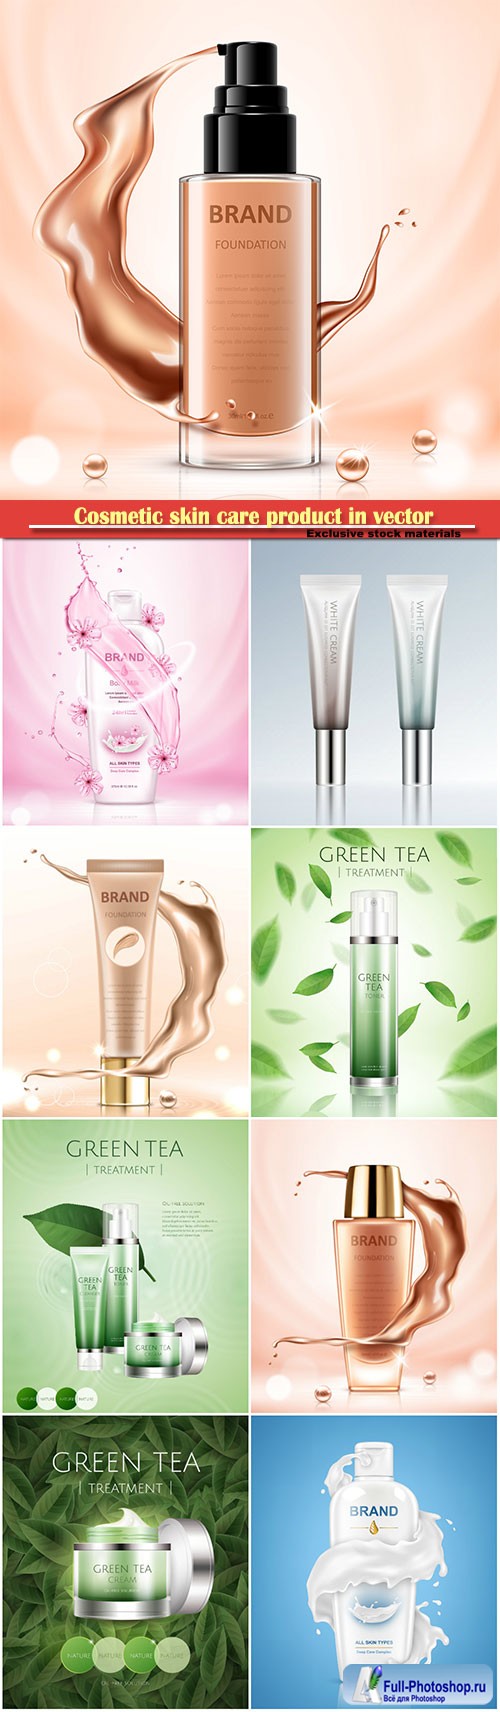 Cosmetic skin care product in vector illustration